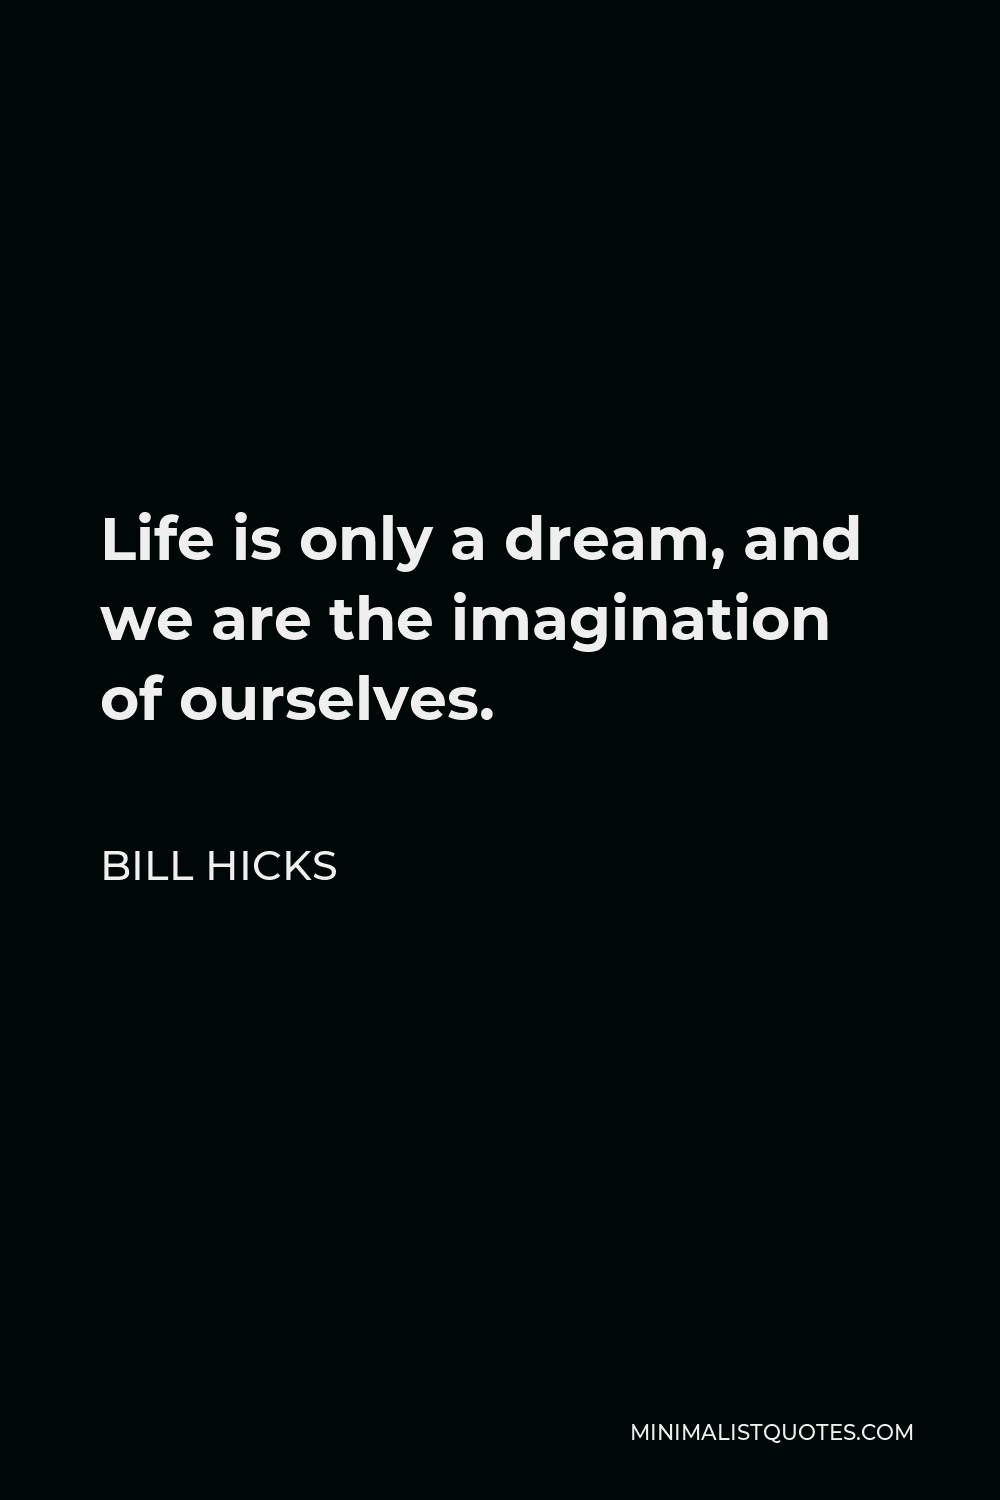 Bill Hicks Quote - Life is only a dream, and we are the imagination of ourselves.